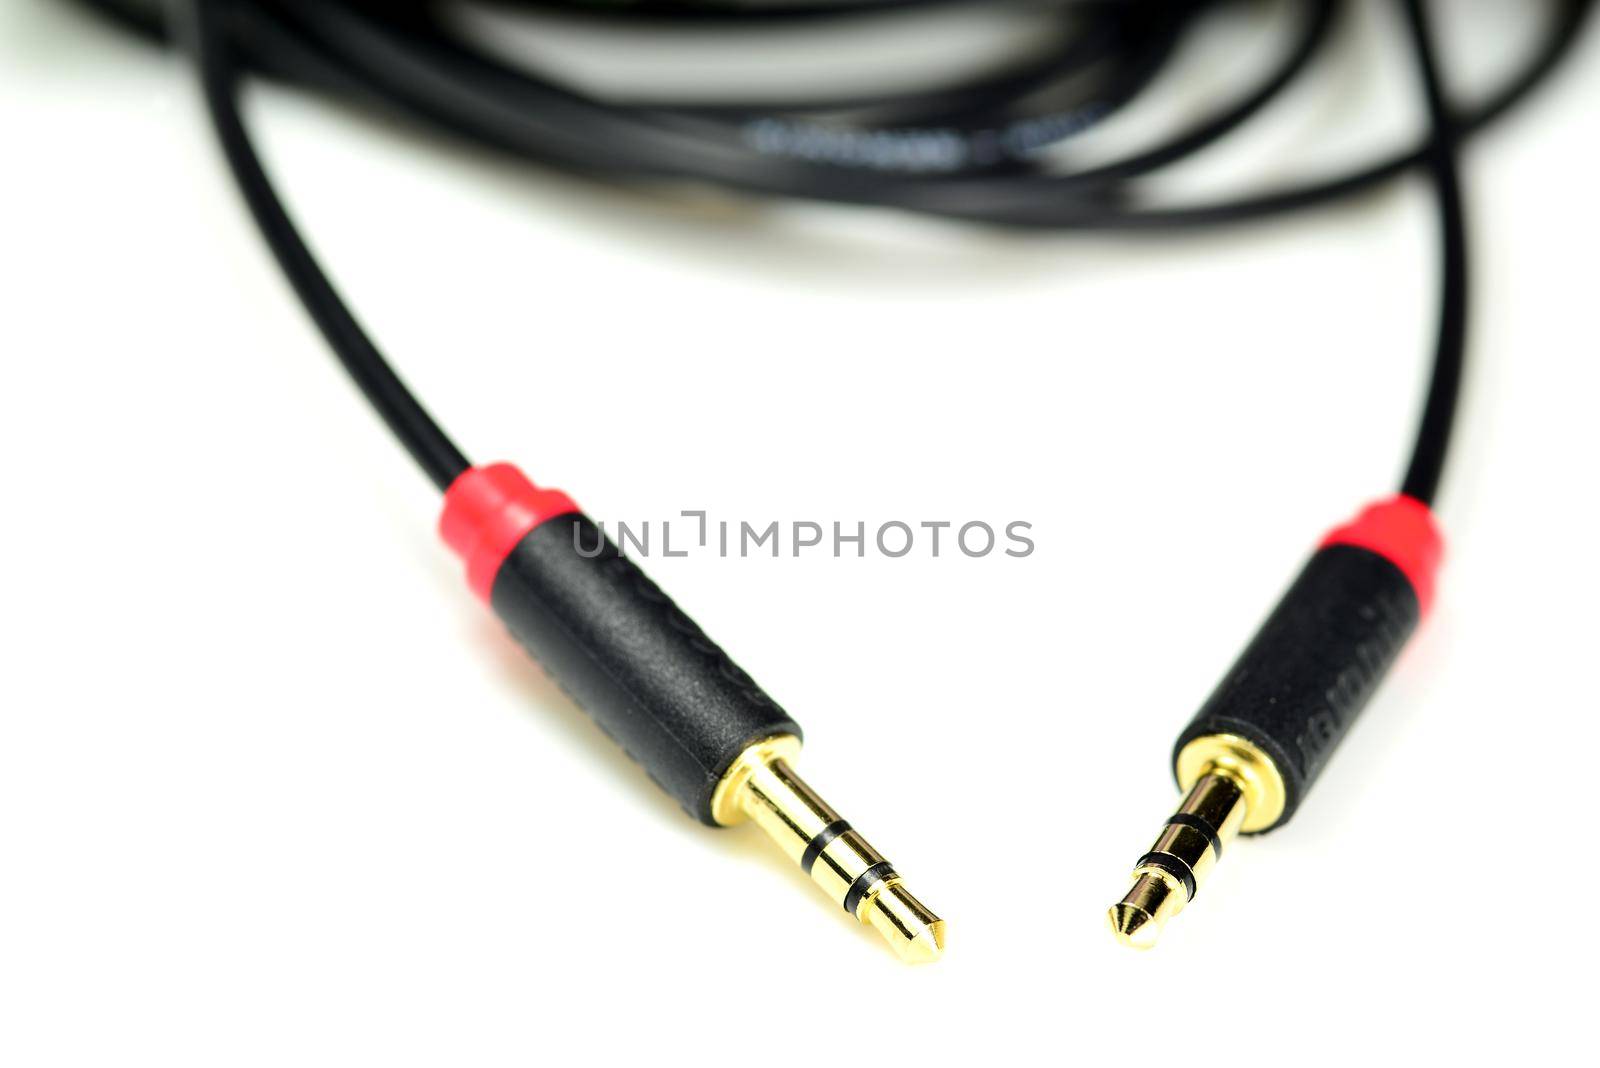 3,5 mm phone connector in a closeup by Jochen